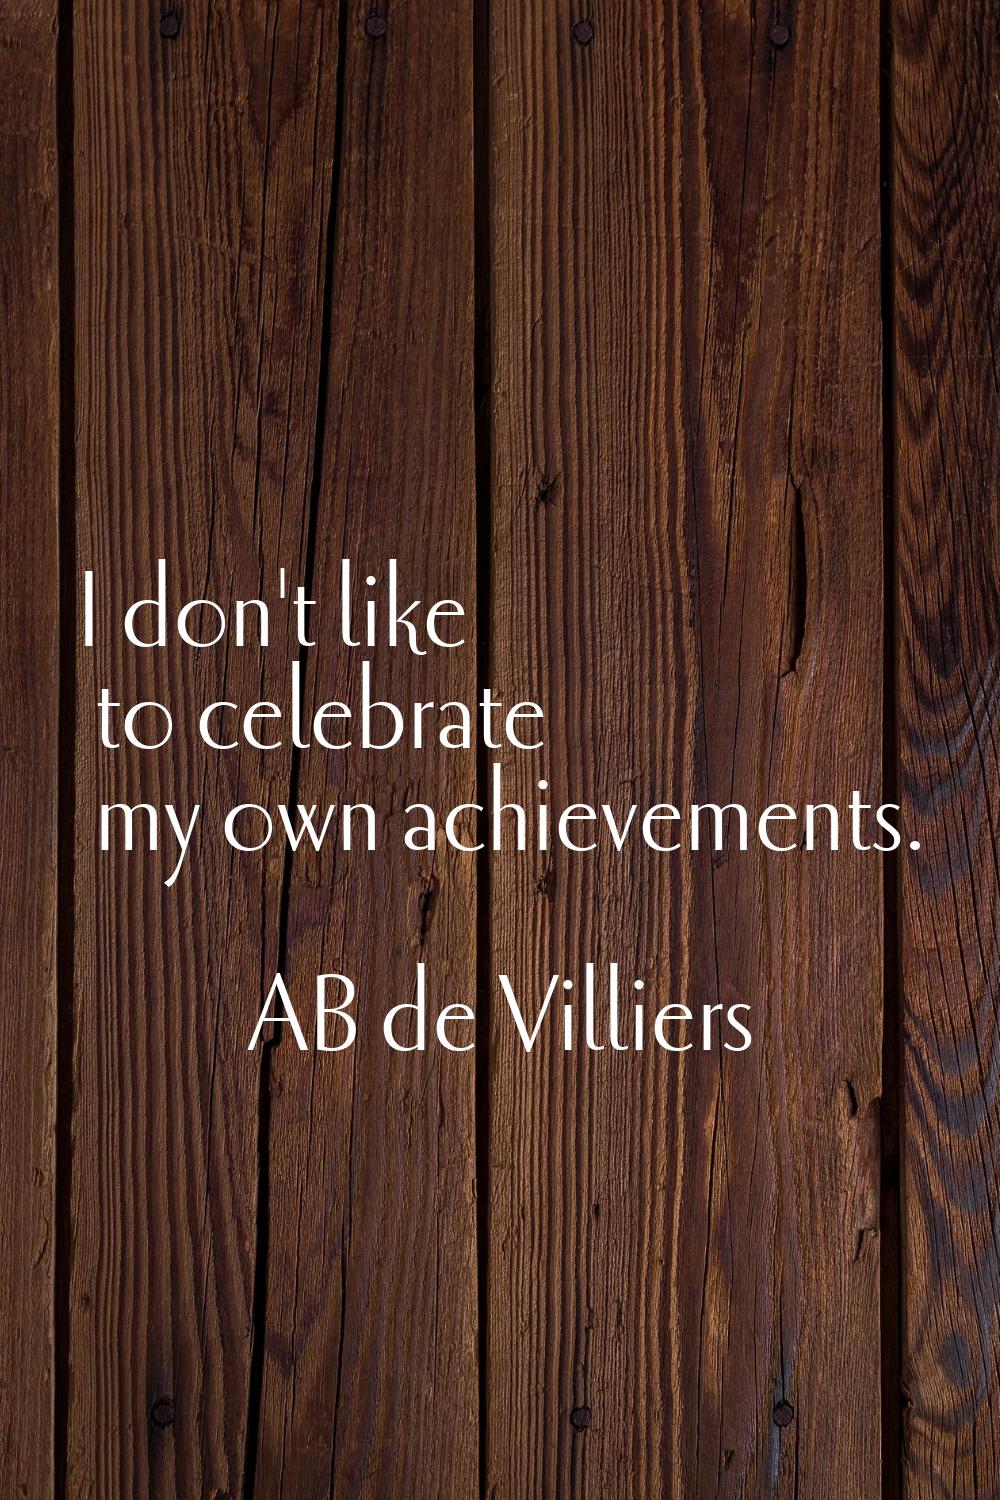 I don't like to celebrate my own achievements.